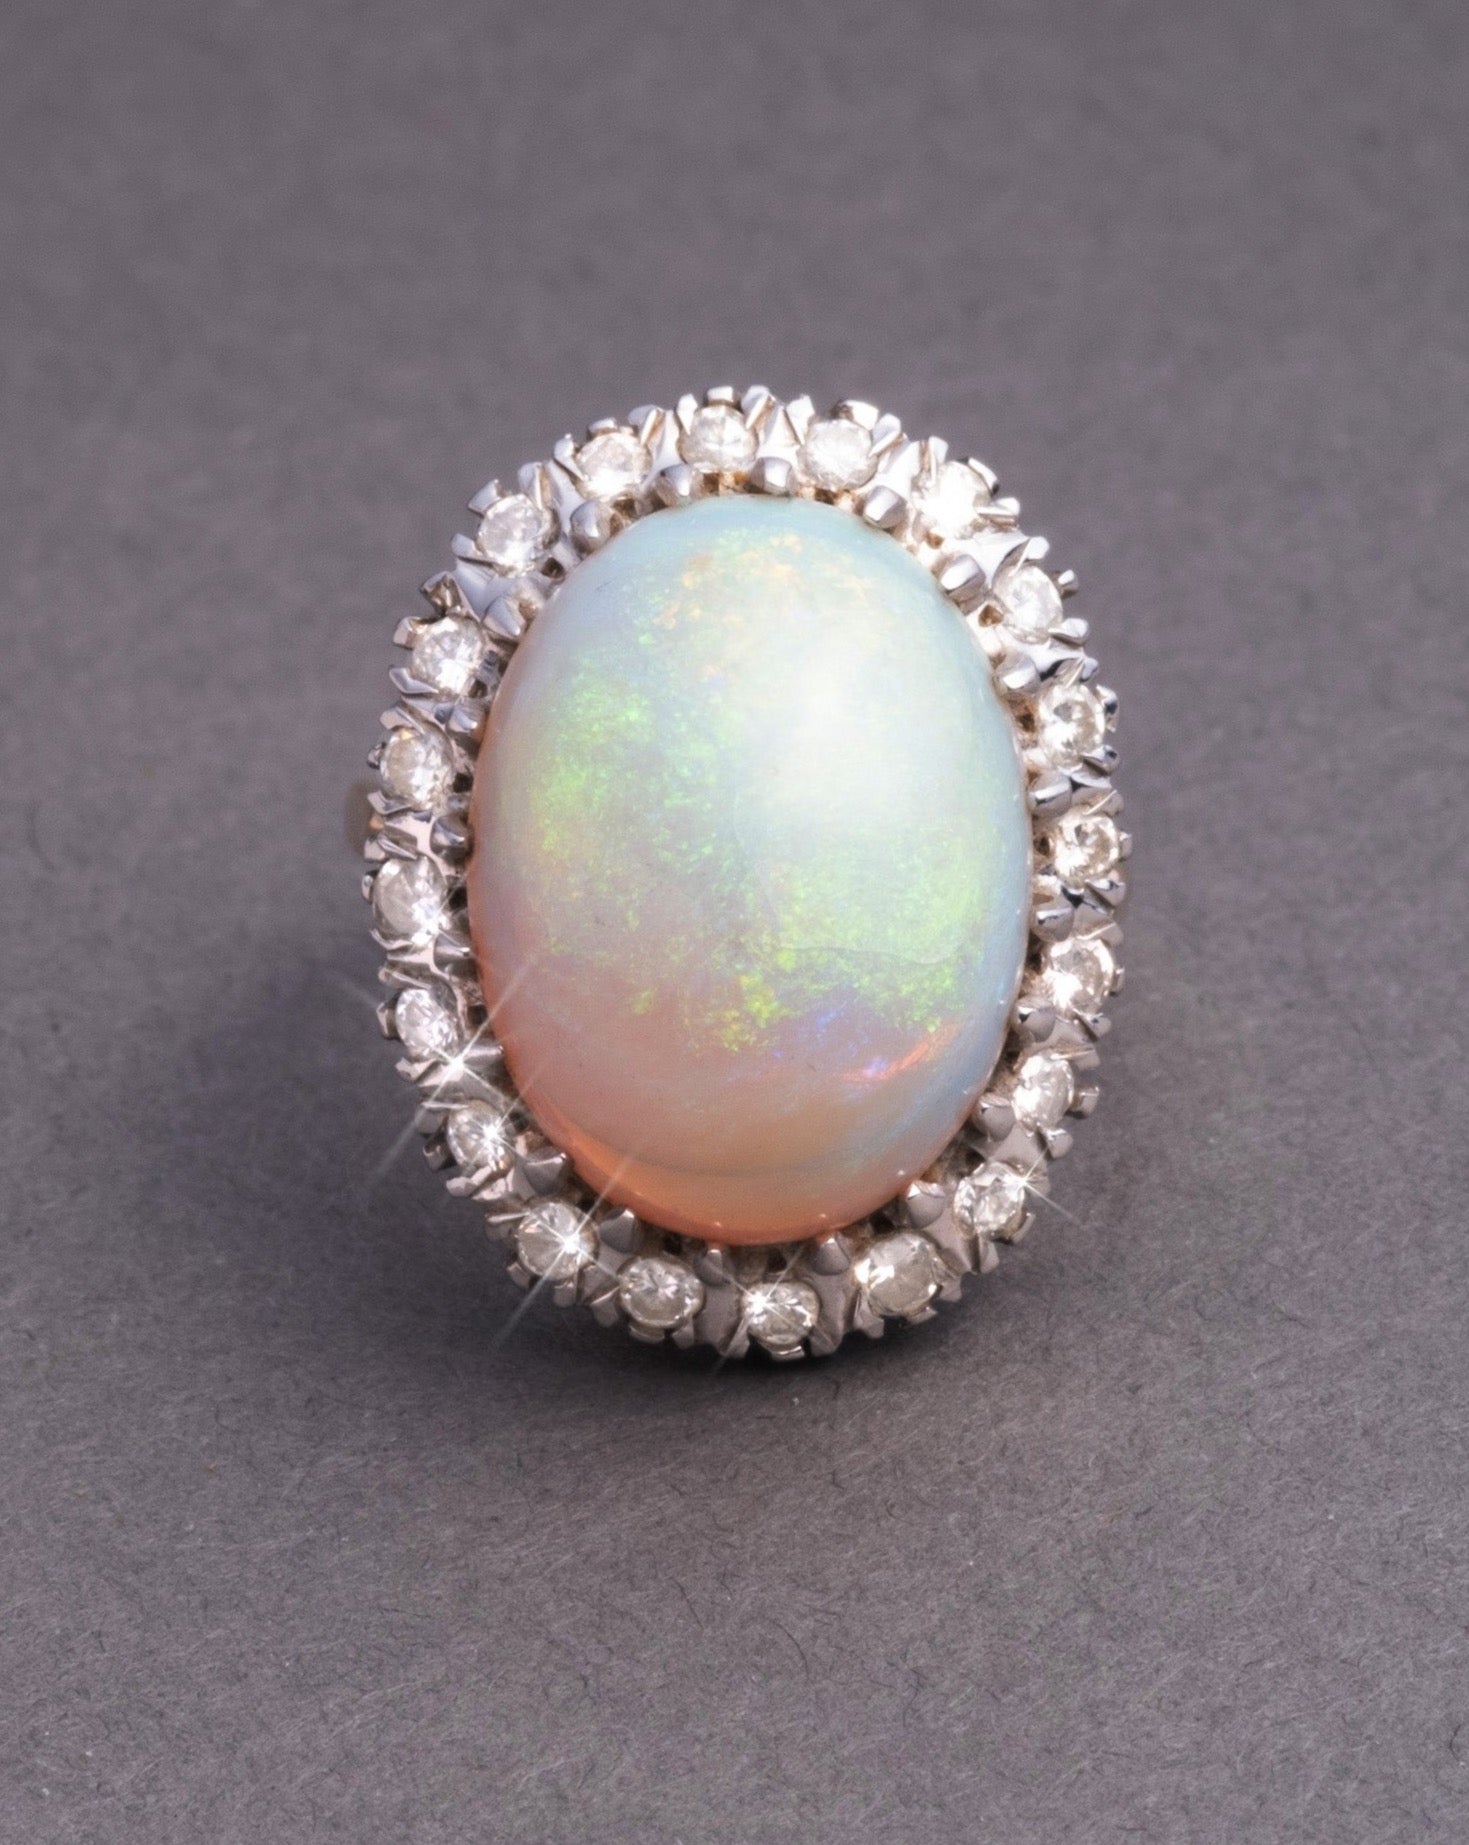 Antique 1920s 14k Gold Opal and Diamond Halo Ring – ALEXIS BITTAR